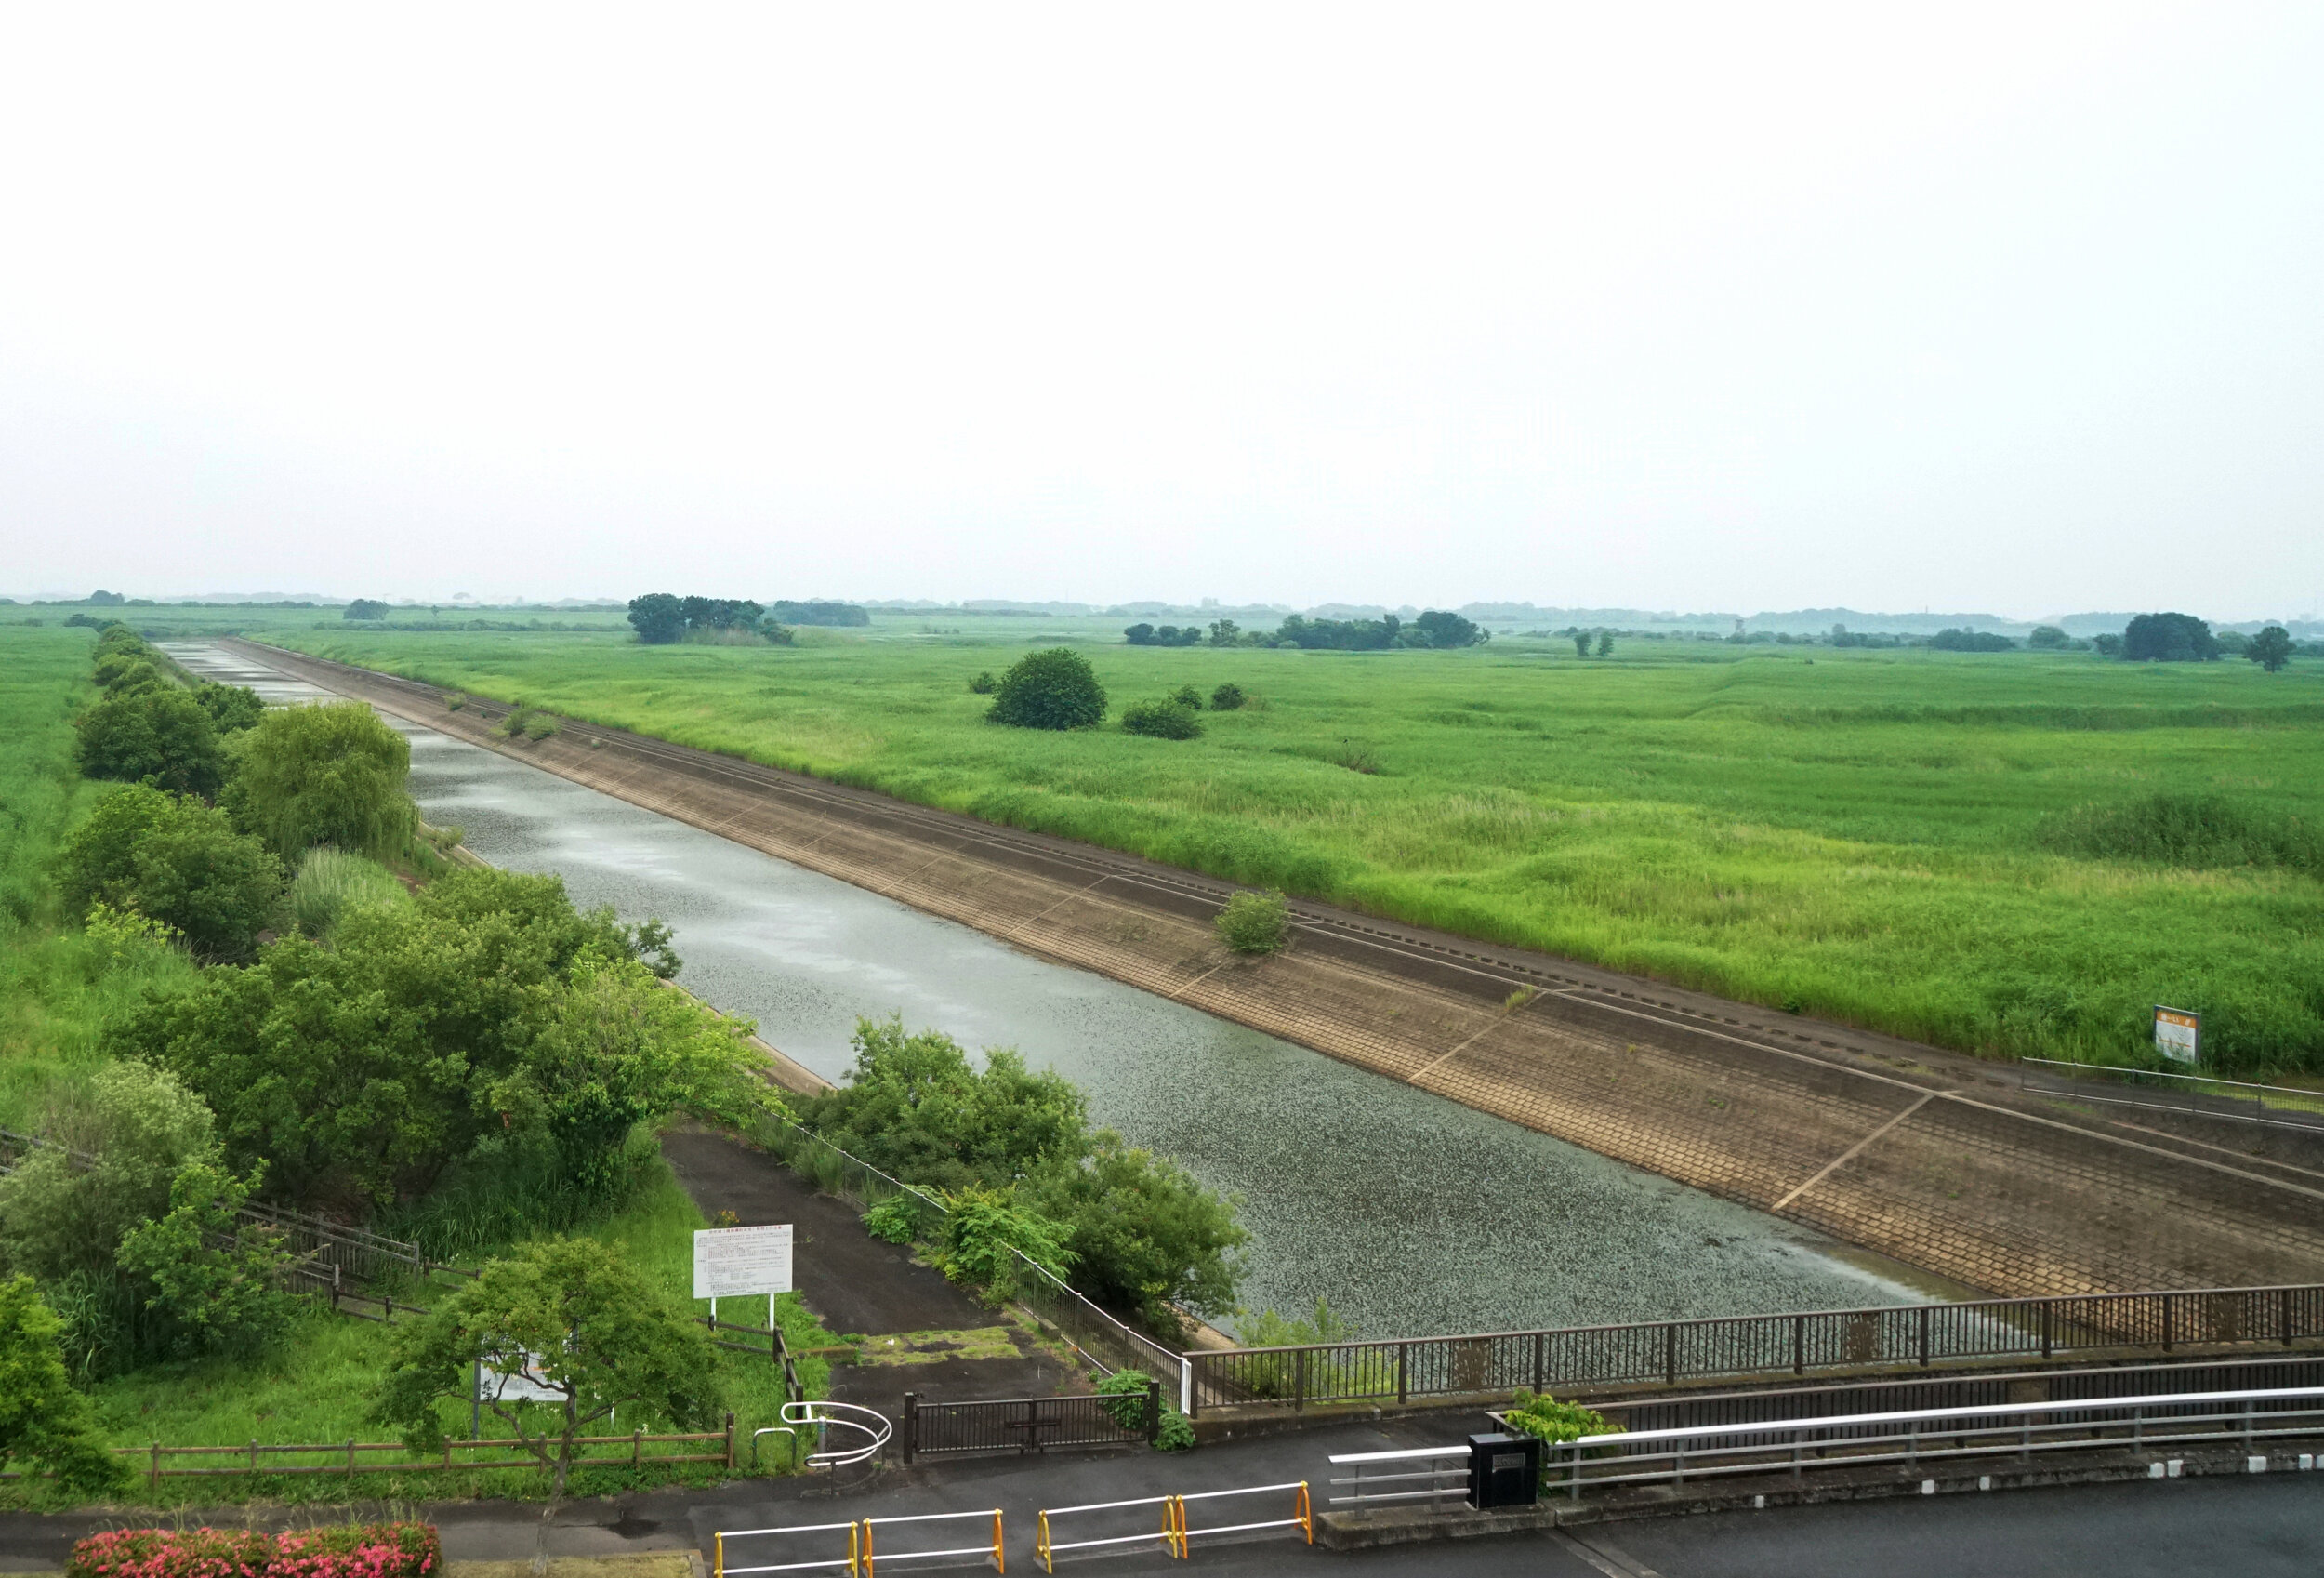  Photo 3: The Watarasee Conservation Area nowadays provides flood protection and water security to Tokyo, but was once an area polluted by the Ashio copper mine upstream. In 2012, the wetland area was recognized and protected under the Ramsar convent